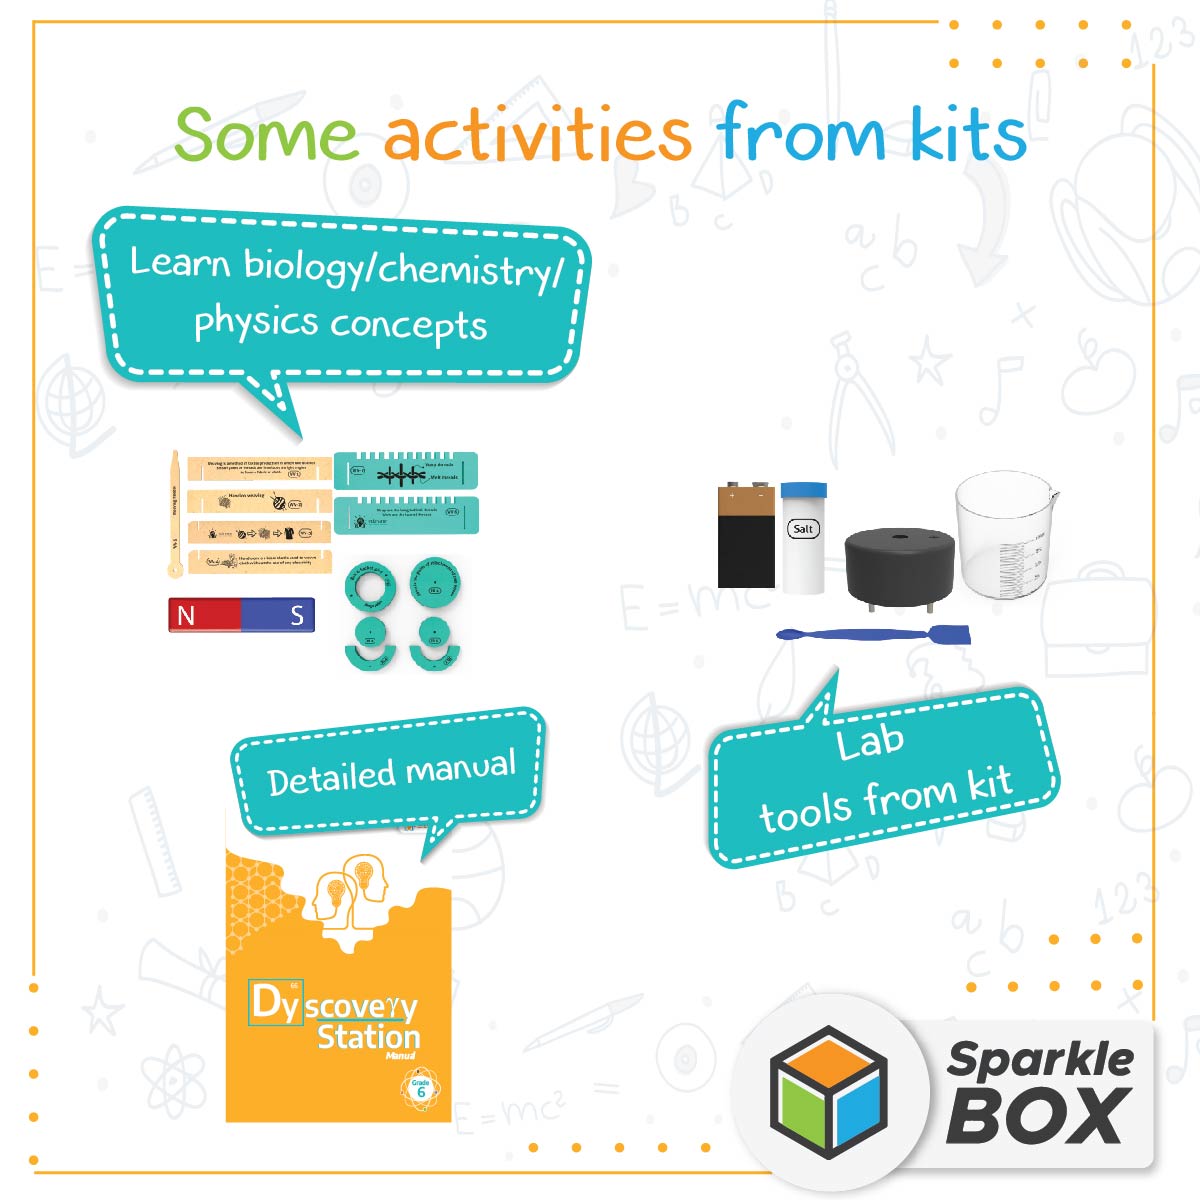 Are you looking for best educational toys for kids? Educational Toys for children help in their overall emotional and cognitive development. #besteducationaltoys #educationaltoys2021 #educationaltoysforkids #educationaltoys #Sparklebox #STEMlearning #educationaltoysonline #DIYKits #Sciencekits #DIYcraftbox #craftbox